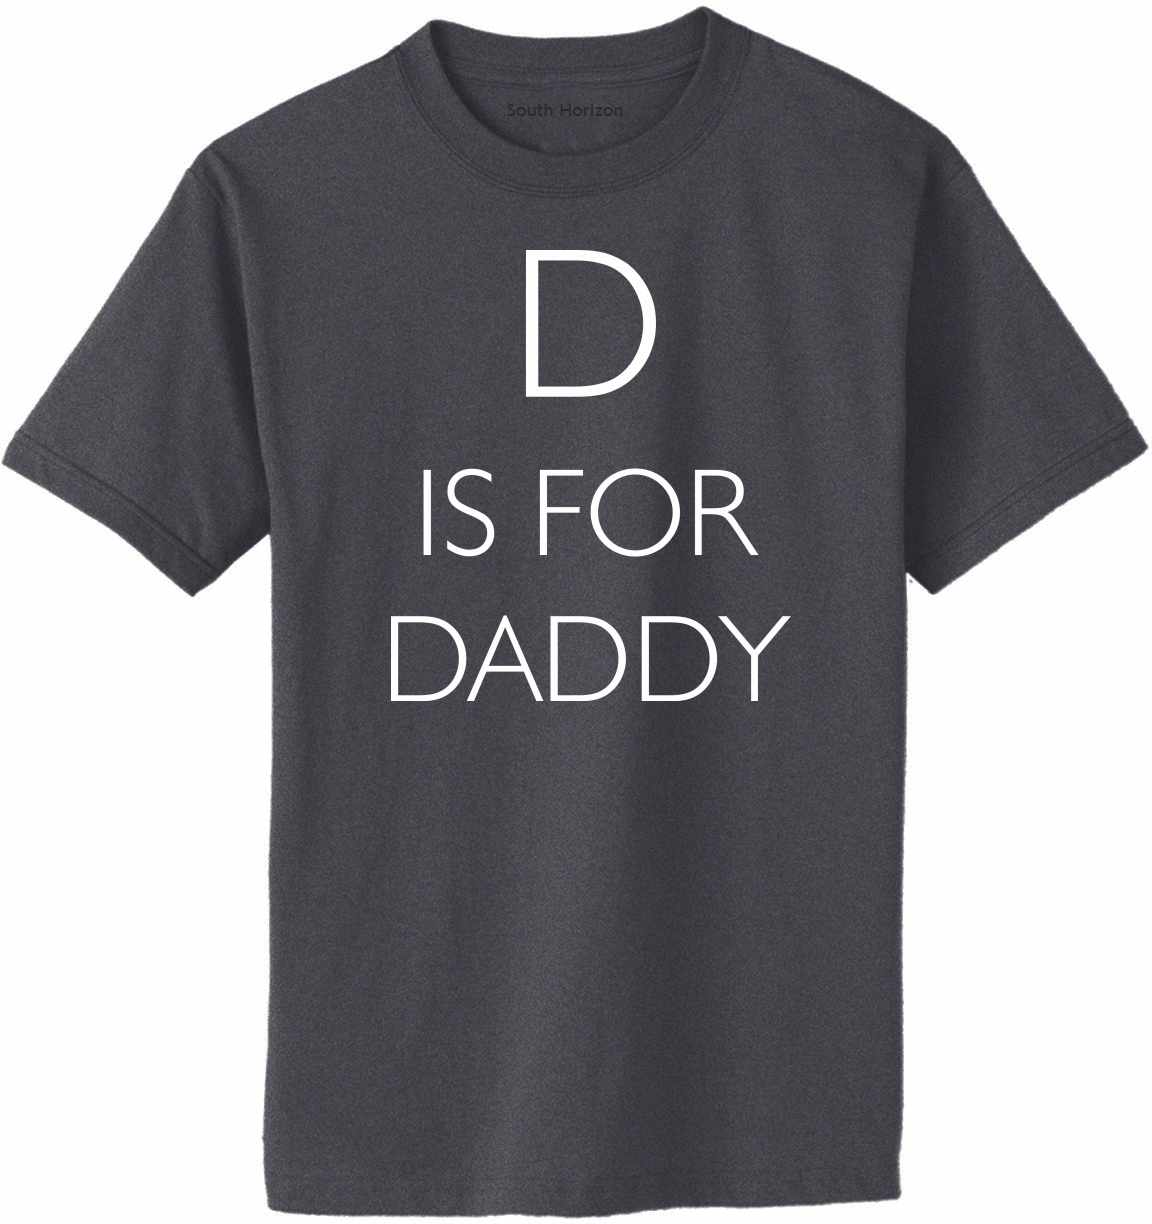 D is for Daddy on Adult T-Shirt